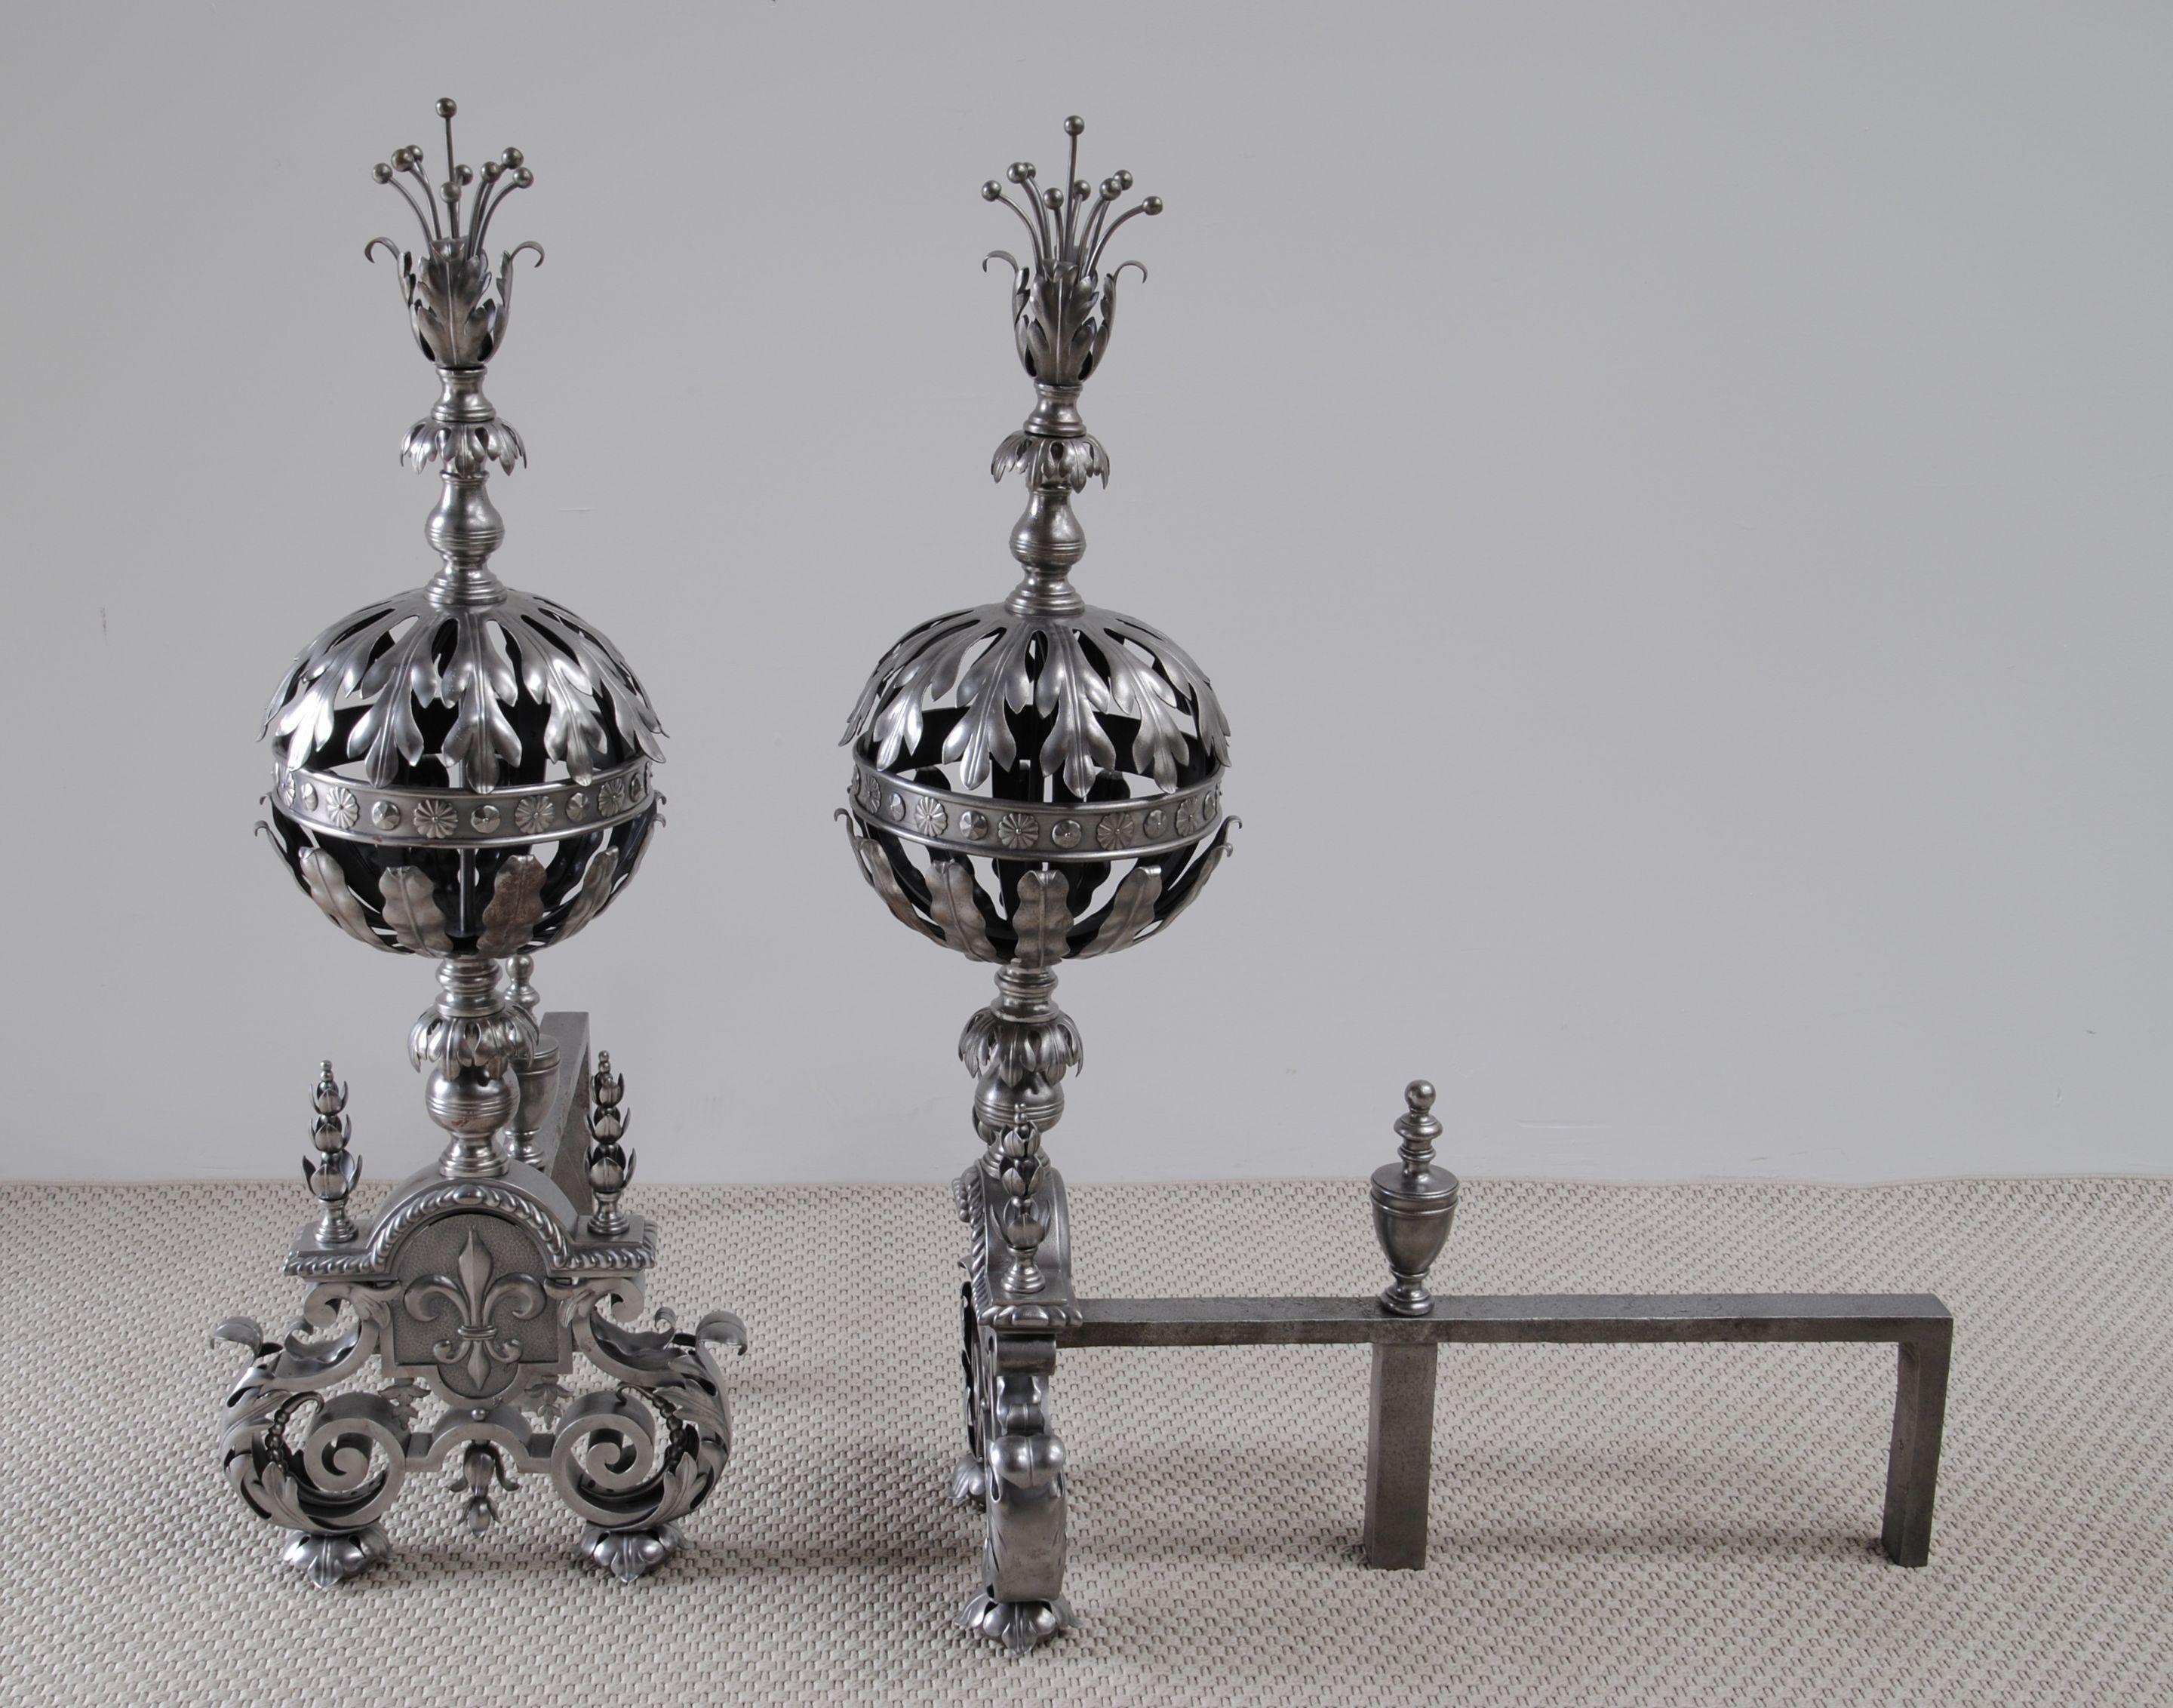 English Pair of Arts & Crafts Steel Andirons For Sale